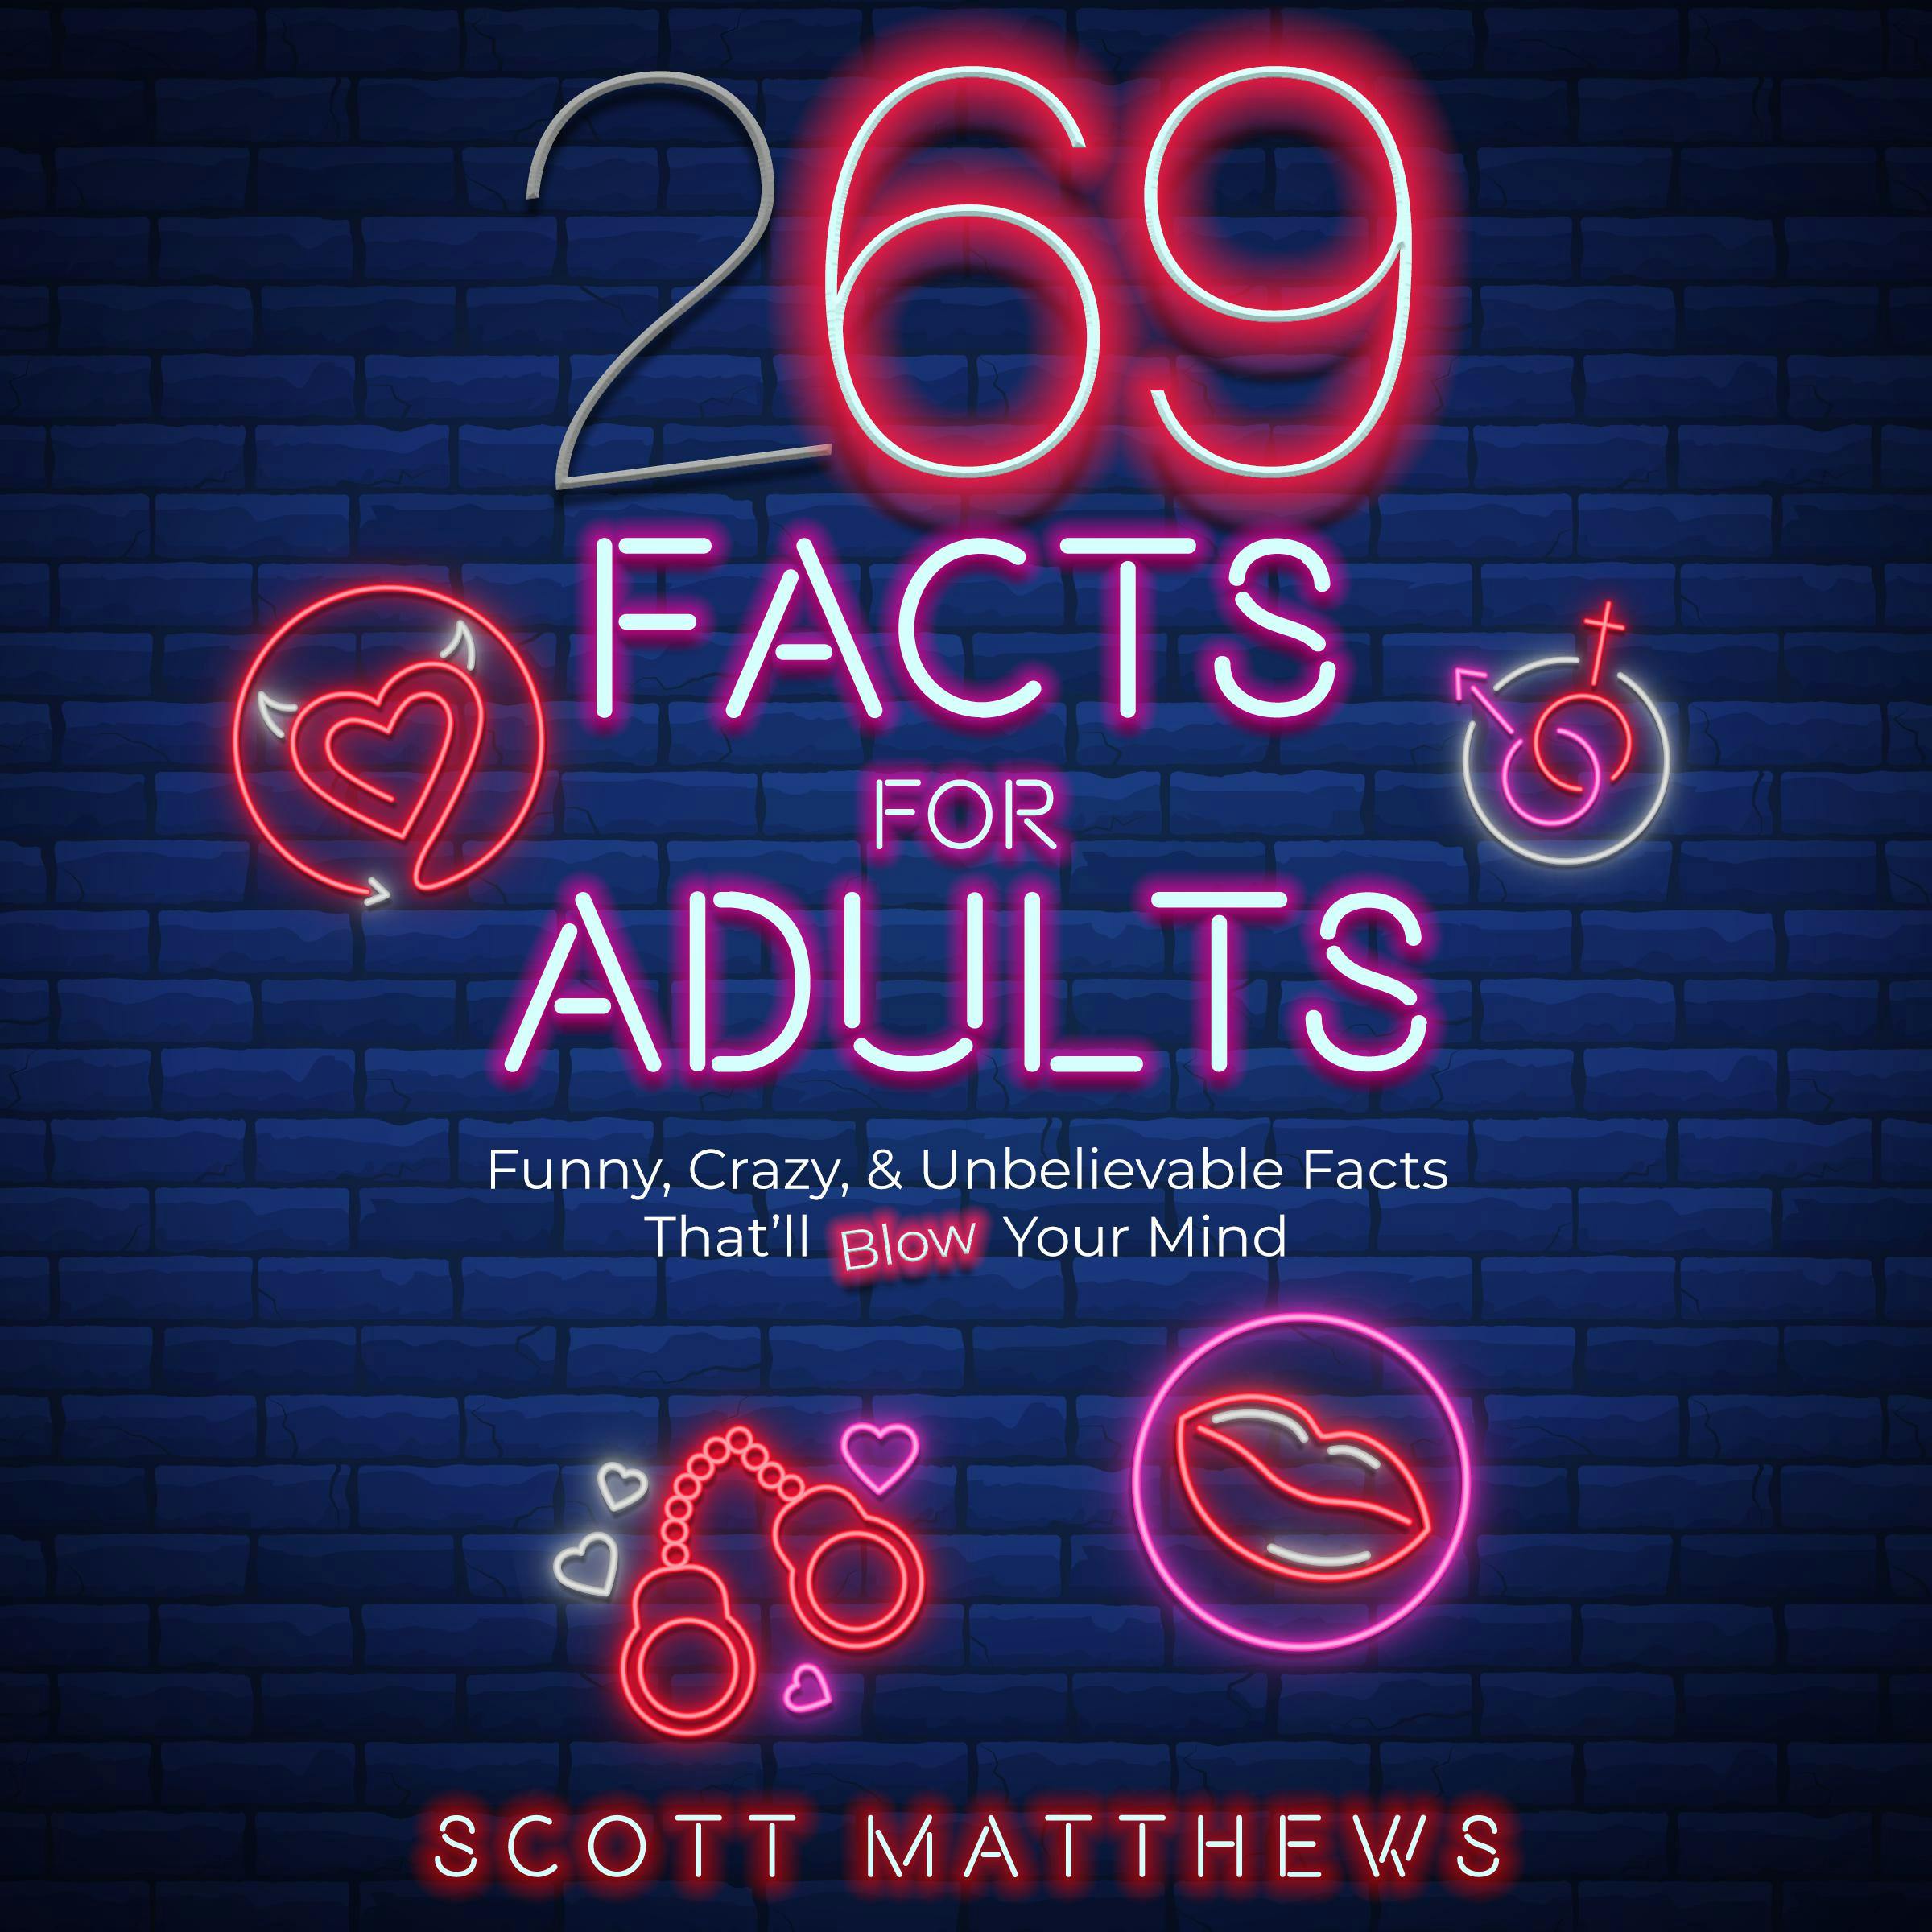 269 Facts For Adults - Funny, Crazy, & Unbelievable Facts That’ll Blow Your Mind - undefined